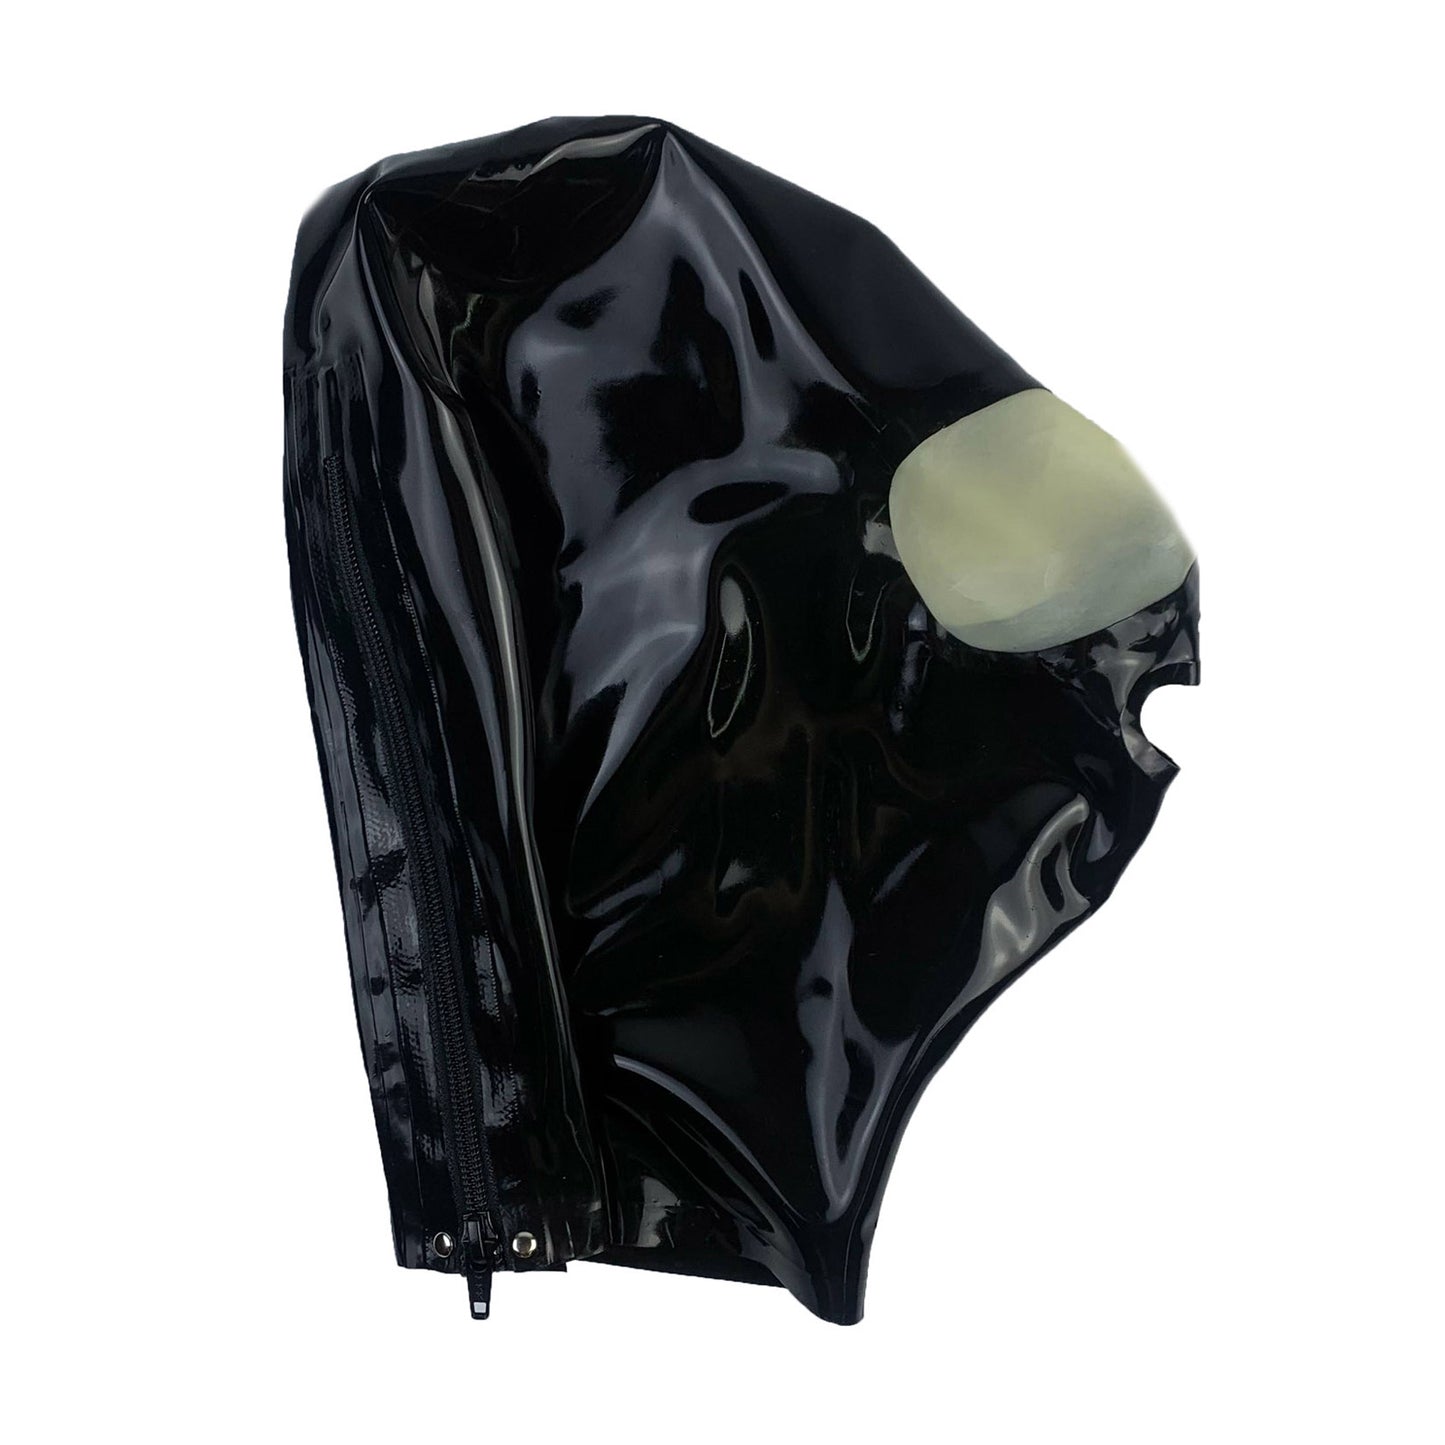 MONNIK Latex Hood Fetish Mask Full Head Eyes Transparent Color Open Mouth Unisex Mask for Party Cosplay Club Wear